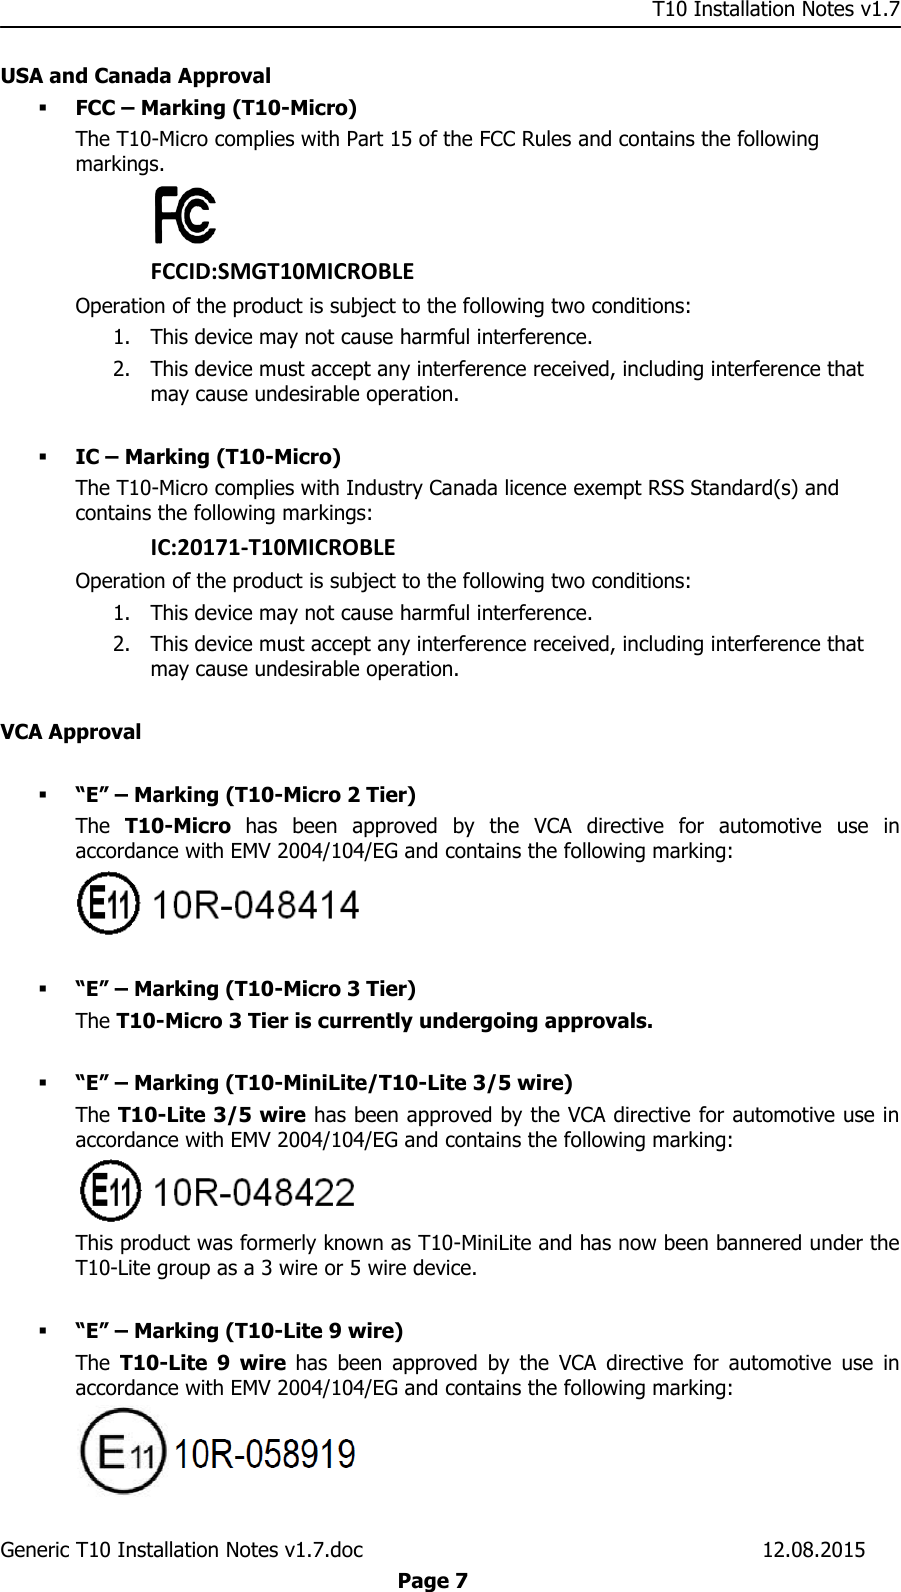     T10 Installation Notes v1.7 Generic T10 Installation Notes v1.7.doc    12.08.2015  Page 7 USA and Canada Approval  FCC – Marking (T10-Micro) The T10-Micro complies with Part 15 of the FCC Rules and contains the following markings.  FCCID:SMGT10MICROBLE Operation of the product is subject to the following two conditions: 1. This device may not cause harmful interference. 2. This device must accept any interference received, including interference that may cause undesirable operation.   IC – Marking (T10-Micro) The T10-Micro complies with Industry Canada licence exempt RSS Standard(s) and contains the following markings: IC:20171-T10MICROBLE Operation of the product is subject to the following two conditions: 1. This device may not cause harmful interference. 2. This device must accept any interference received, including interference that may cause undesirable operation.  VCA Approval   “E” – Marking (T10-Micro 2 Tier) The  T10-Micro  has  been  approved  by  the  VCA  directive  for  automotive  use  in accordance with EMV 2004/104/EG and contains the following marking:    “E” – Marking (T10-Micro 3 Tier) The T10-Micro 3 Tier is currently undergoing approvals.   “E” – Marking (T10-MiniLite/T10-Lite 3/5 wire) The T10-Lite 3/5 wire has been approved by the VCA directive for automotive use in accordance with EMV 2004/104/EG and contains the following marking:  This product was formerly known as T10-MiniLite and has now been bannered under the T10-Lite group as a 3 wire or 5 wire device.   “E” – Marking (T10-Lite 9 wire) The  T10-Lite  9  wire  has  been  approved  by  the  VCA  directive  for  automotive  use  in accordance with EMV 2004/104/EG and contains the following marking:  